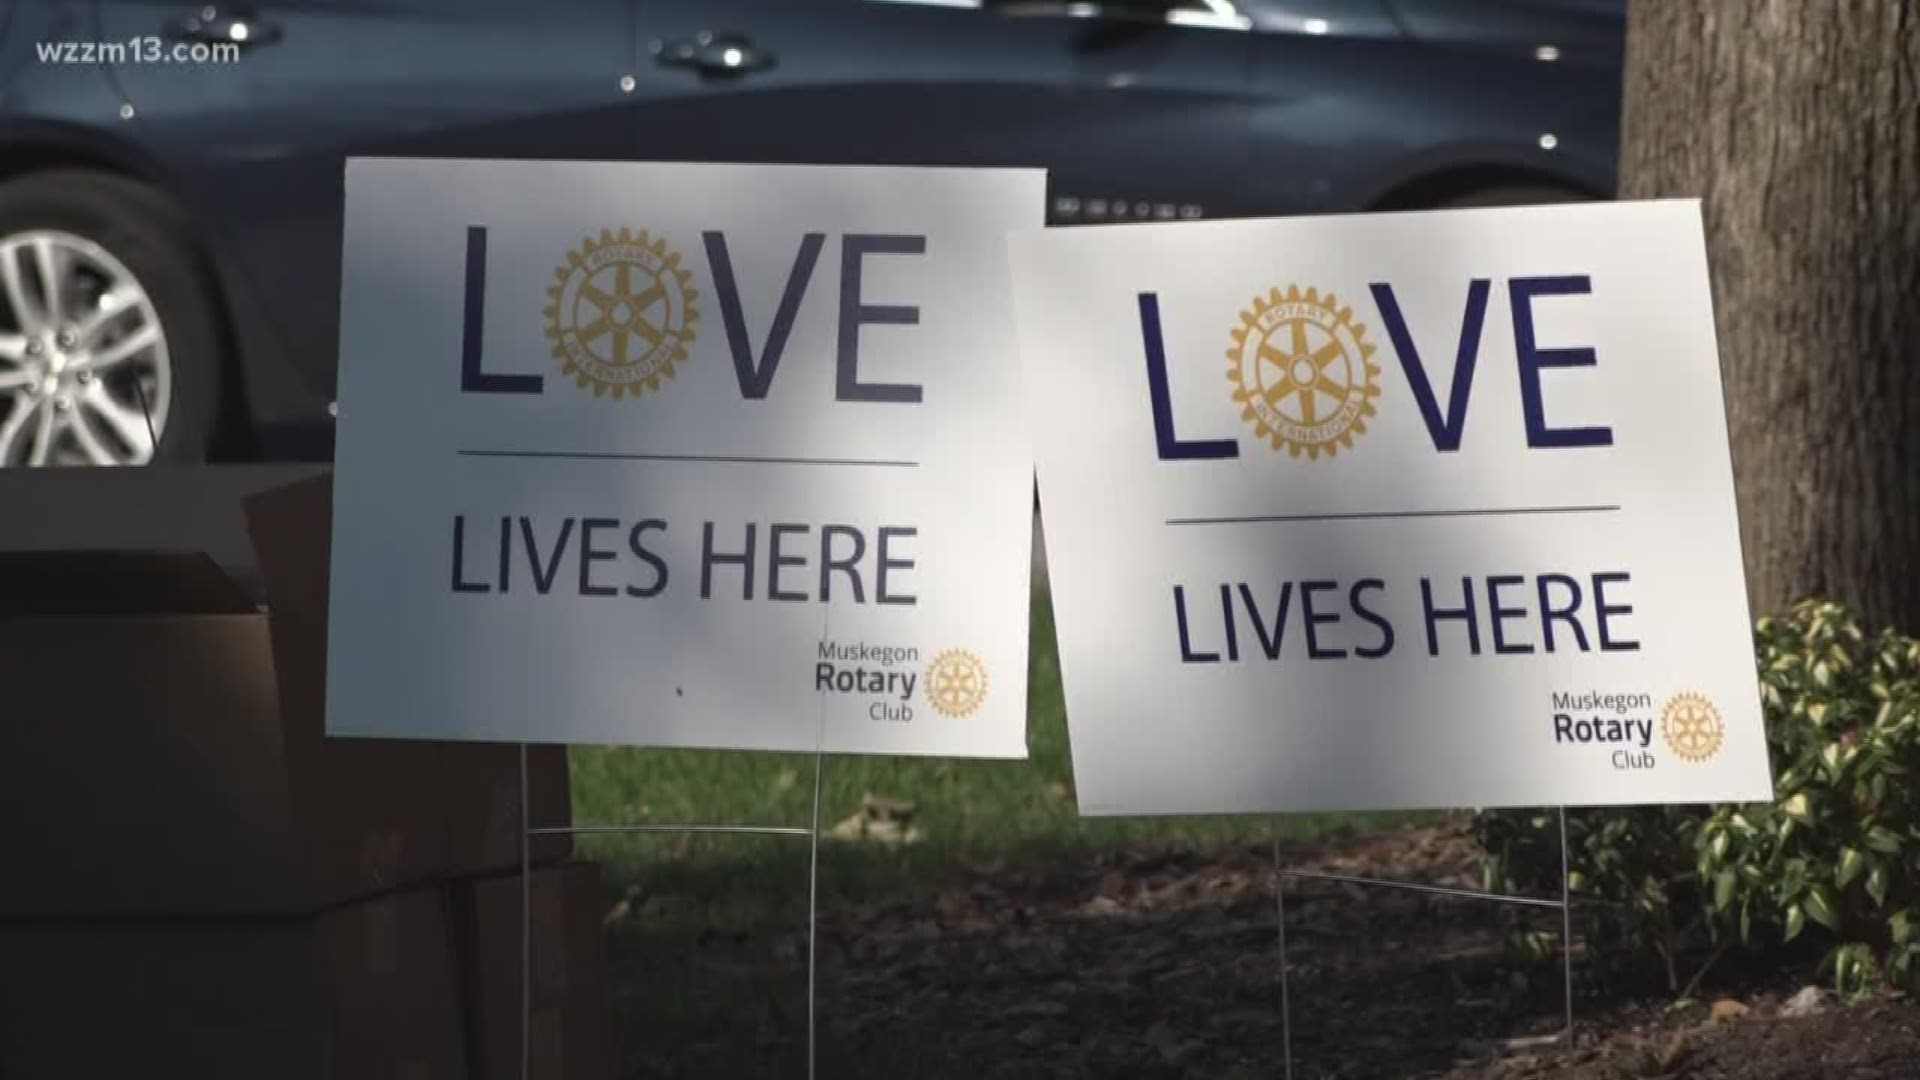 Love Lives Here event held in Muskegon